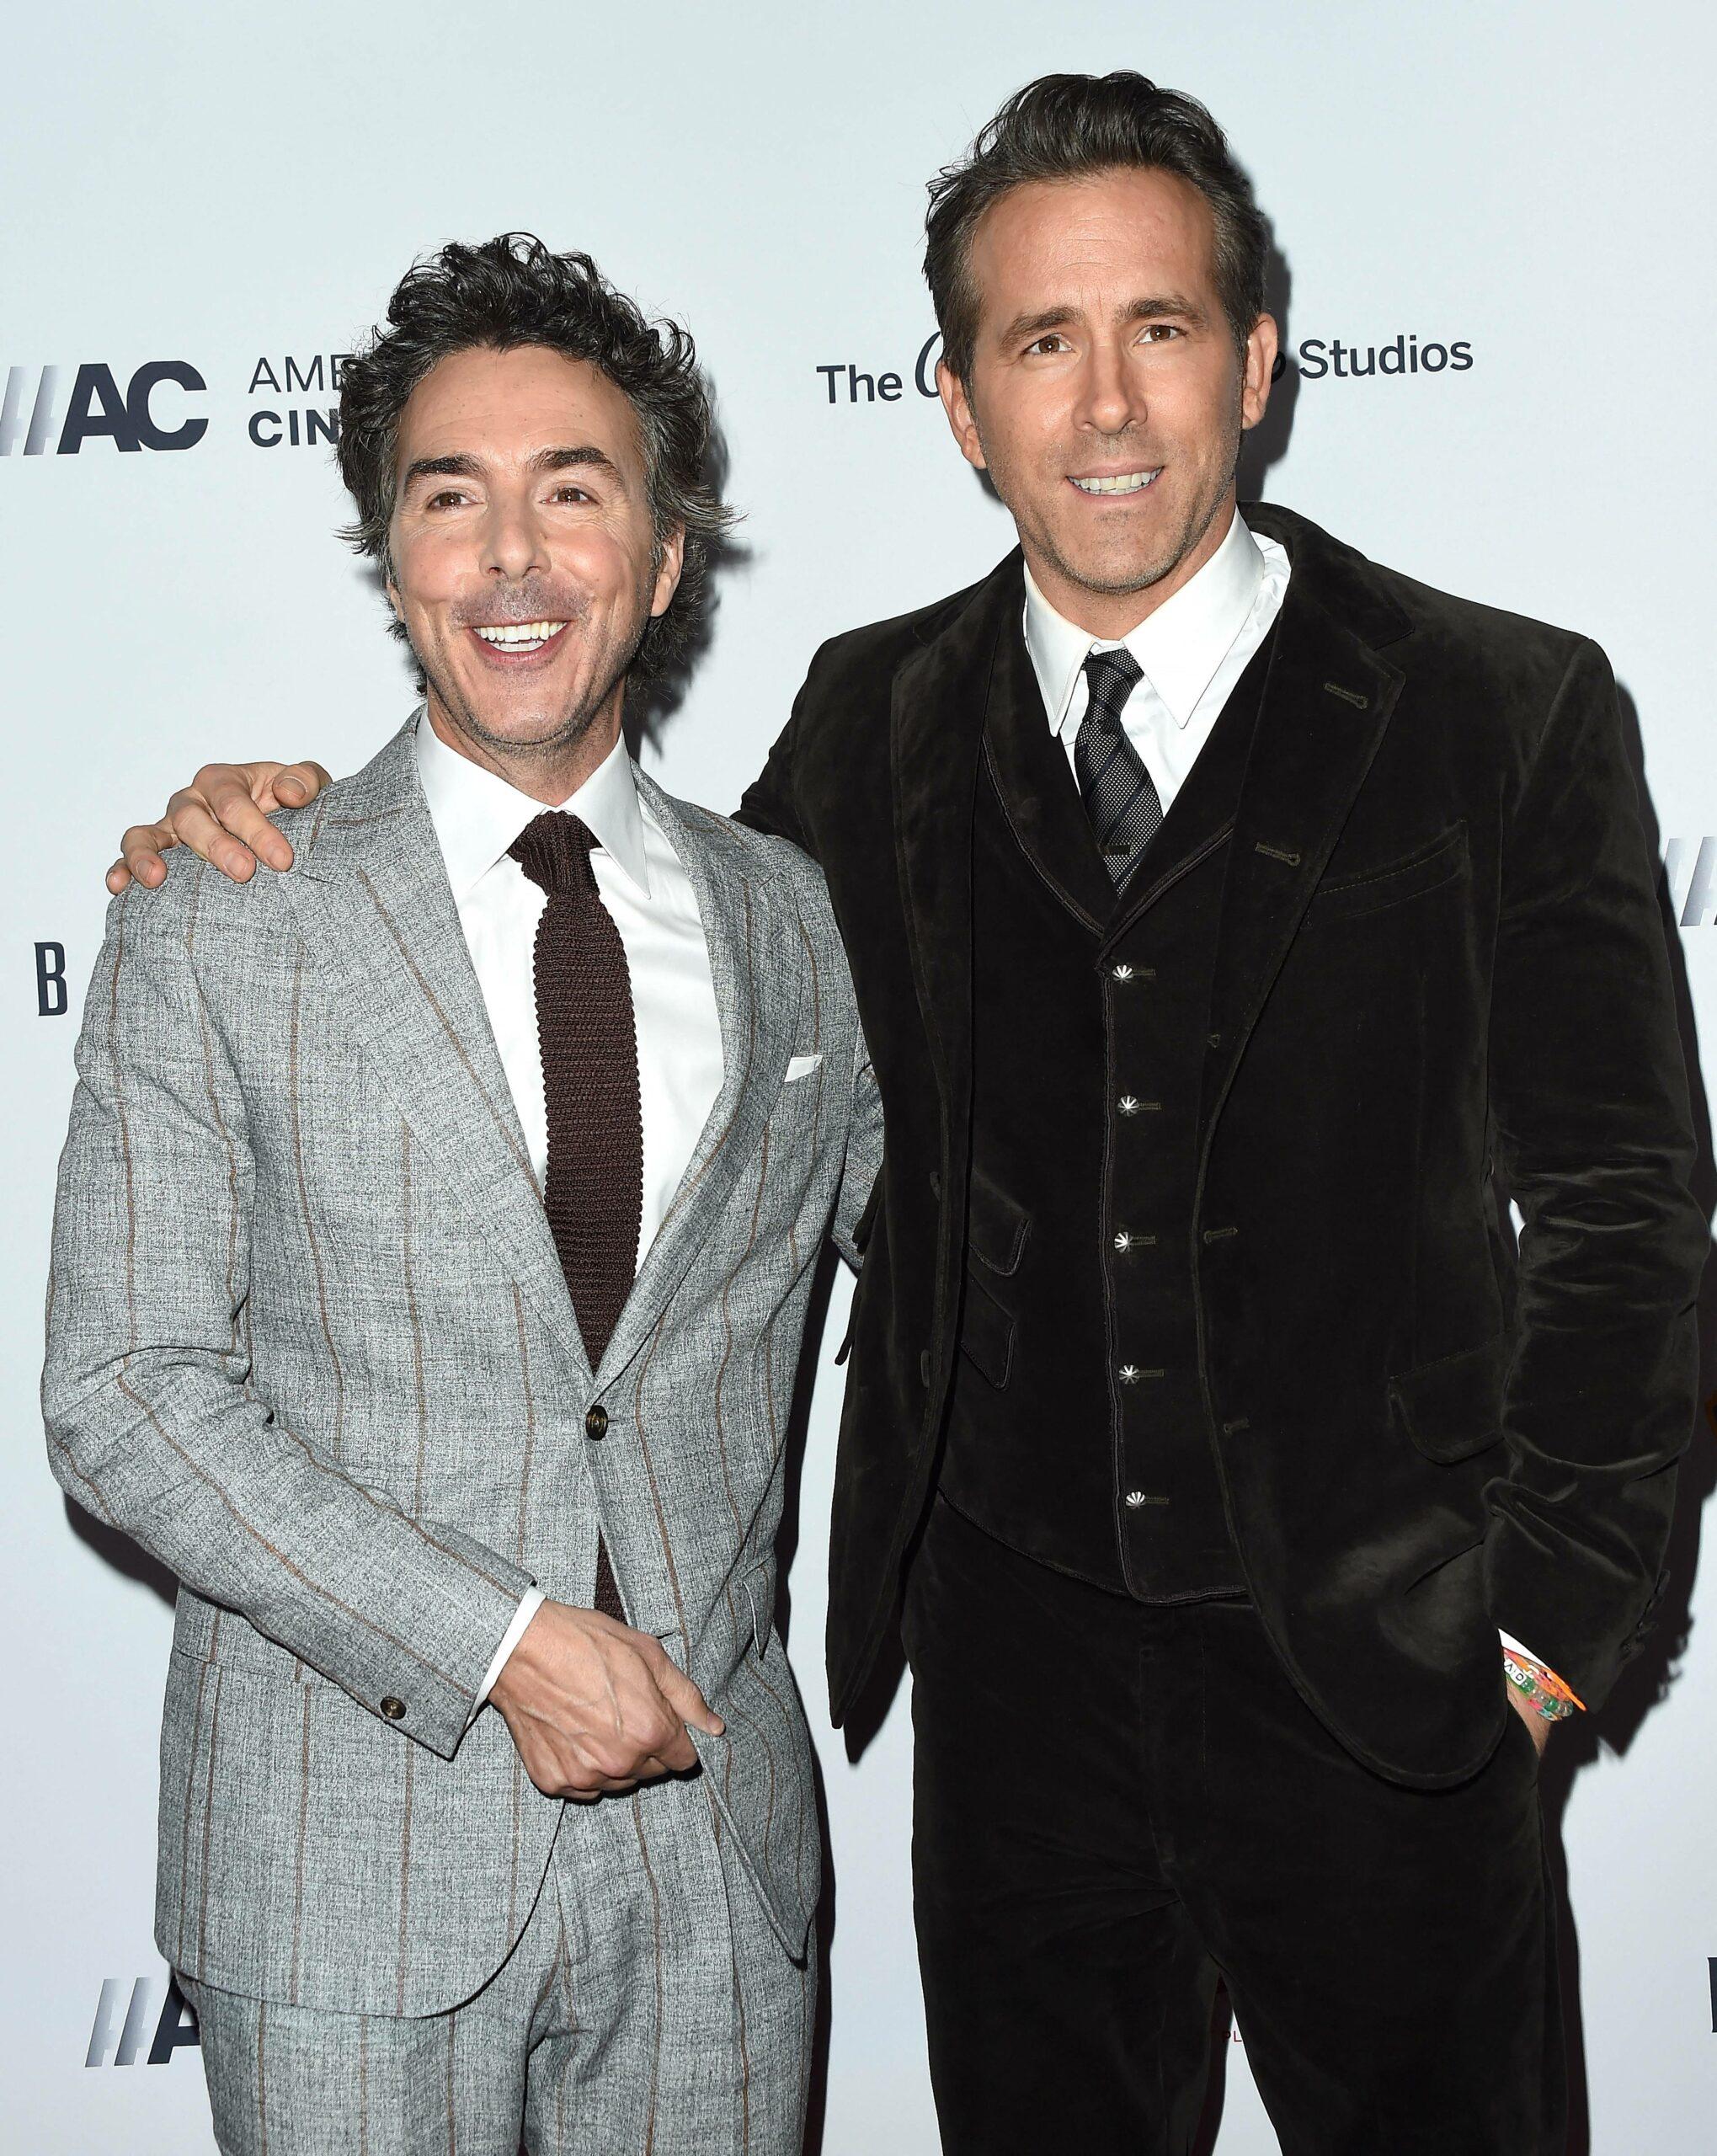 Shawn Levy and Ryan Reynolds at the American Cinematheque Awards Honoring Ryan Reynolds